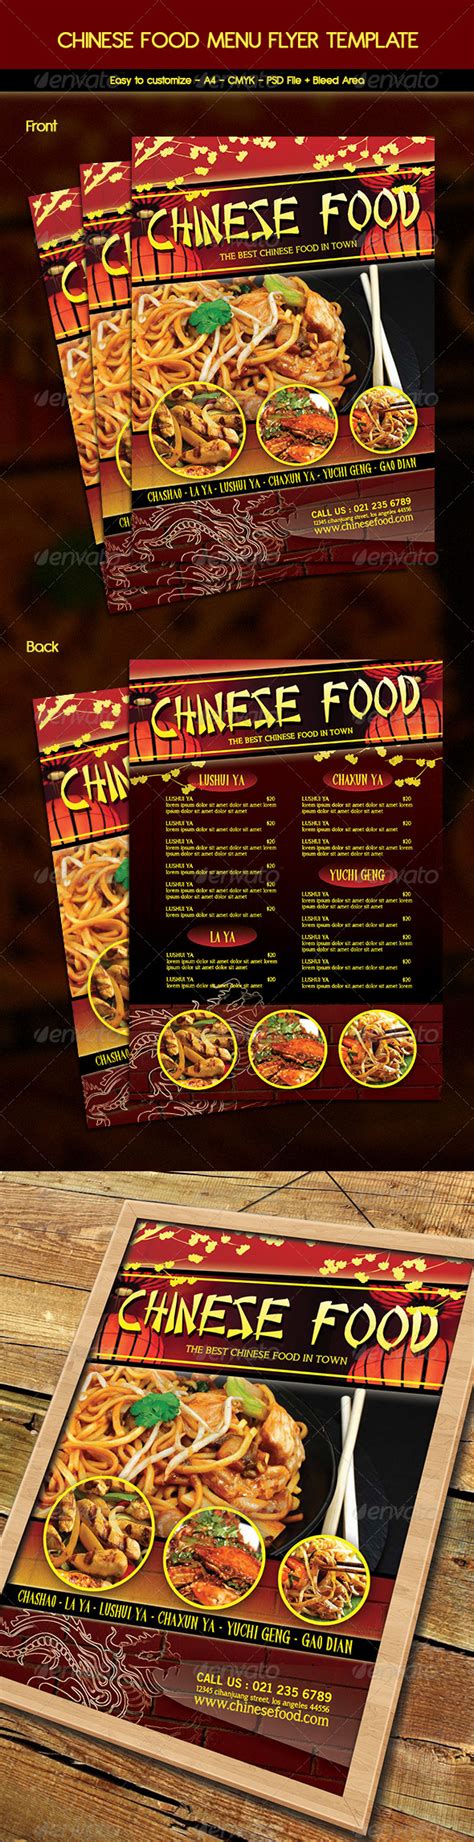 Order the big plate of chicken for the table, load up on the tender, insanely spicy sis kebabs and get yourself some of the lamb dumplings (tugur) and chaomian (chopped noodles with meat and veg. Chinese Food Menu Flyer by arifpoernomo | GraphicRiver